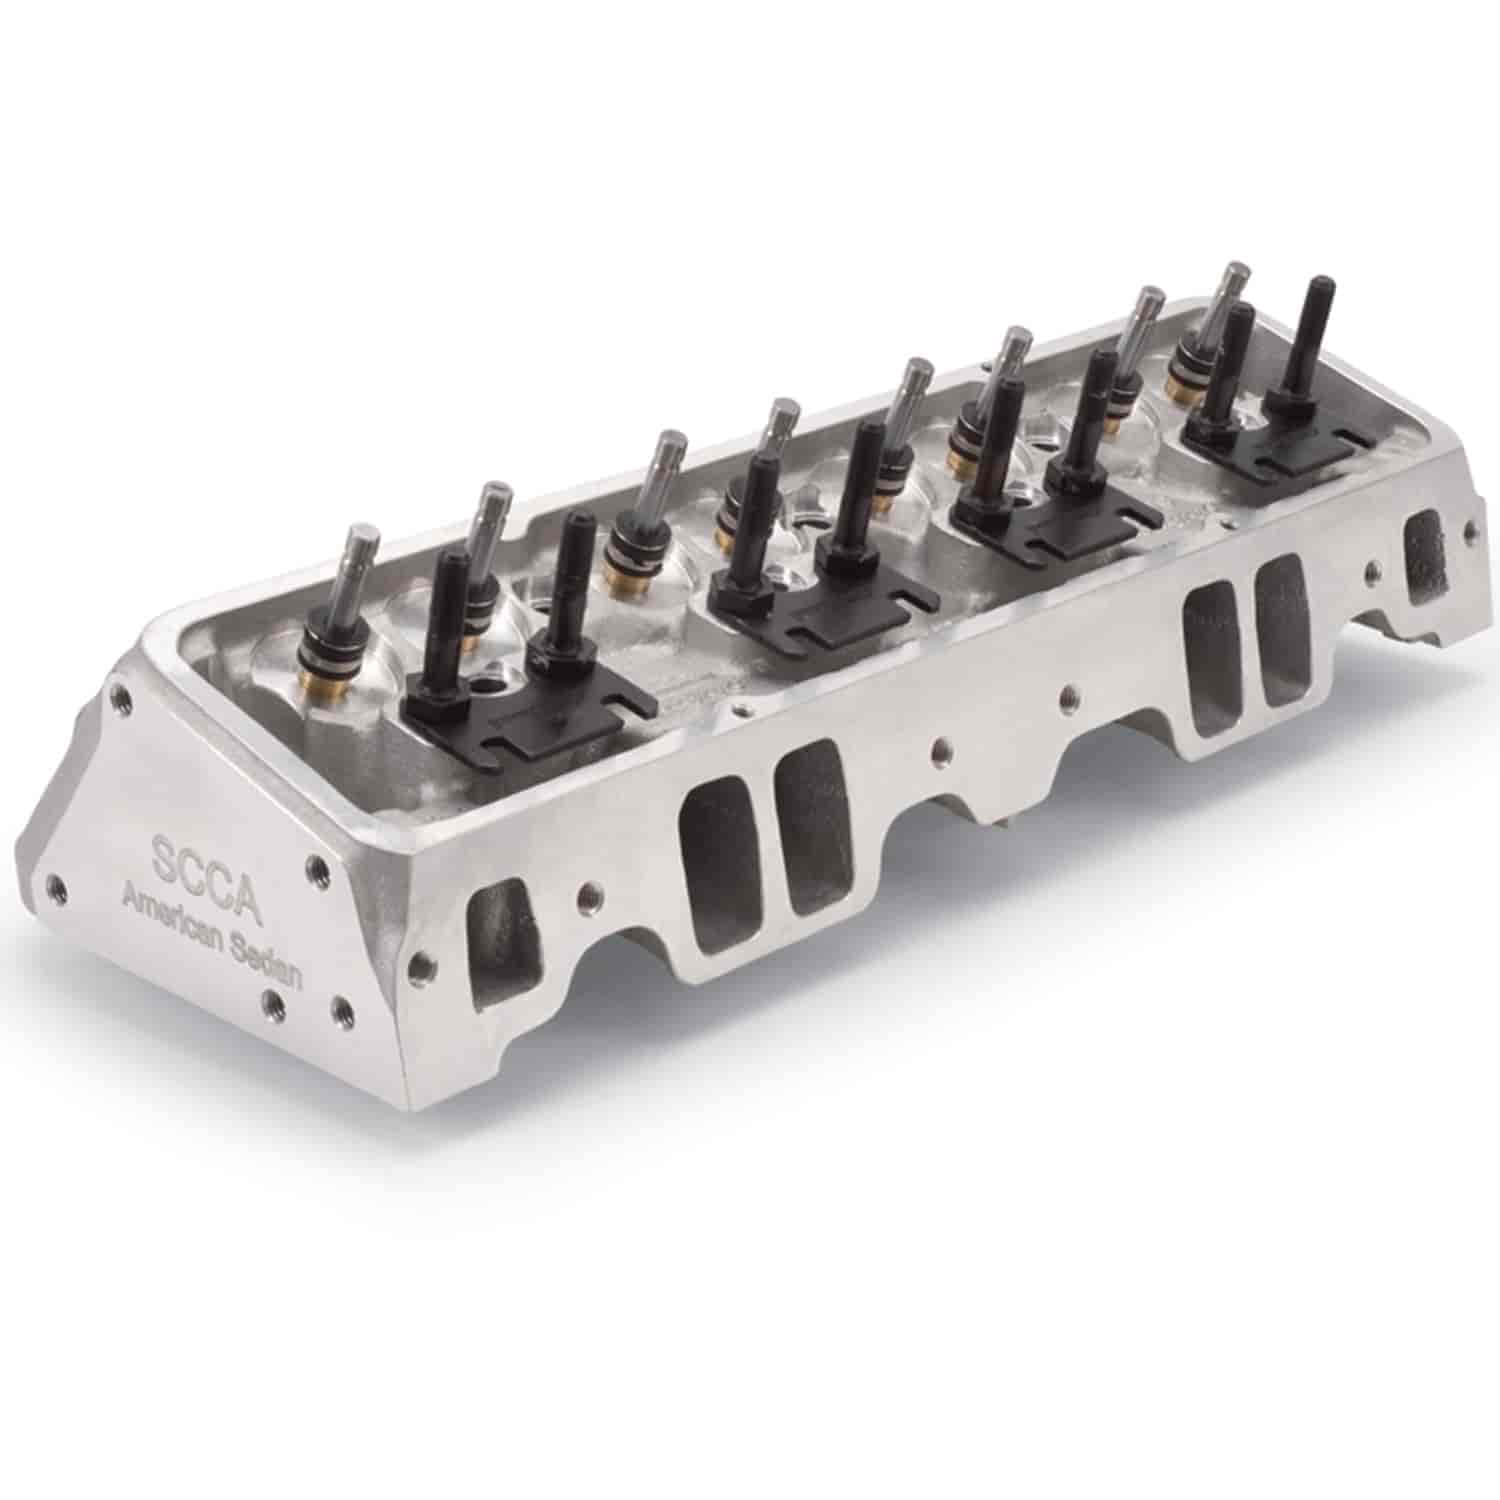 SCCA Perfromer RPM Cylinder Heads for Small Block Chevy